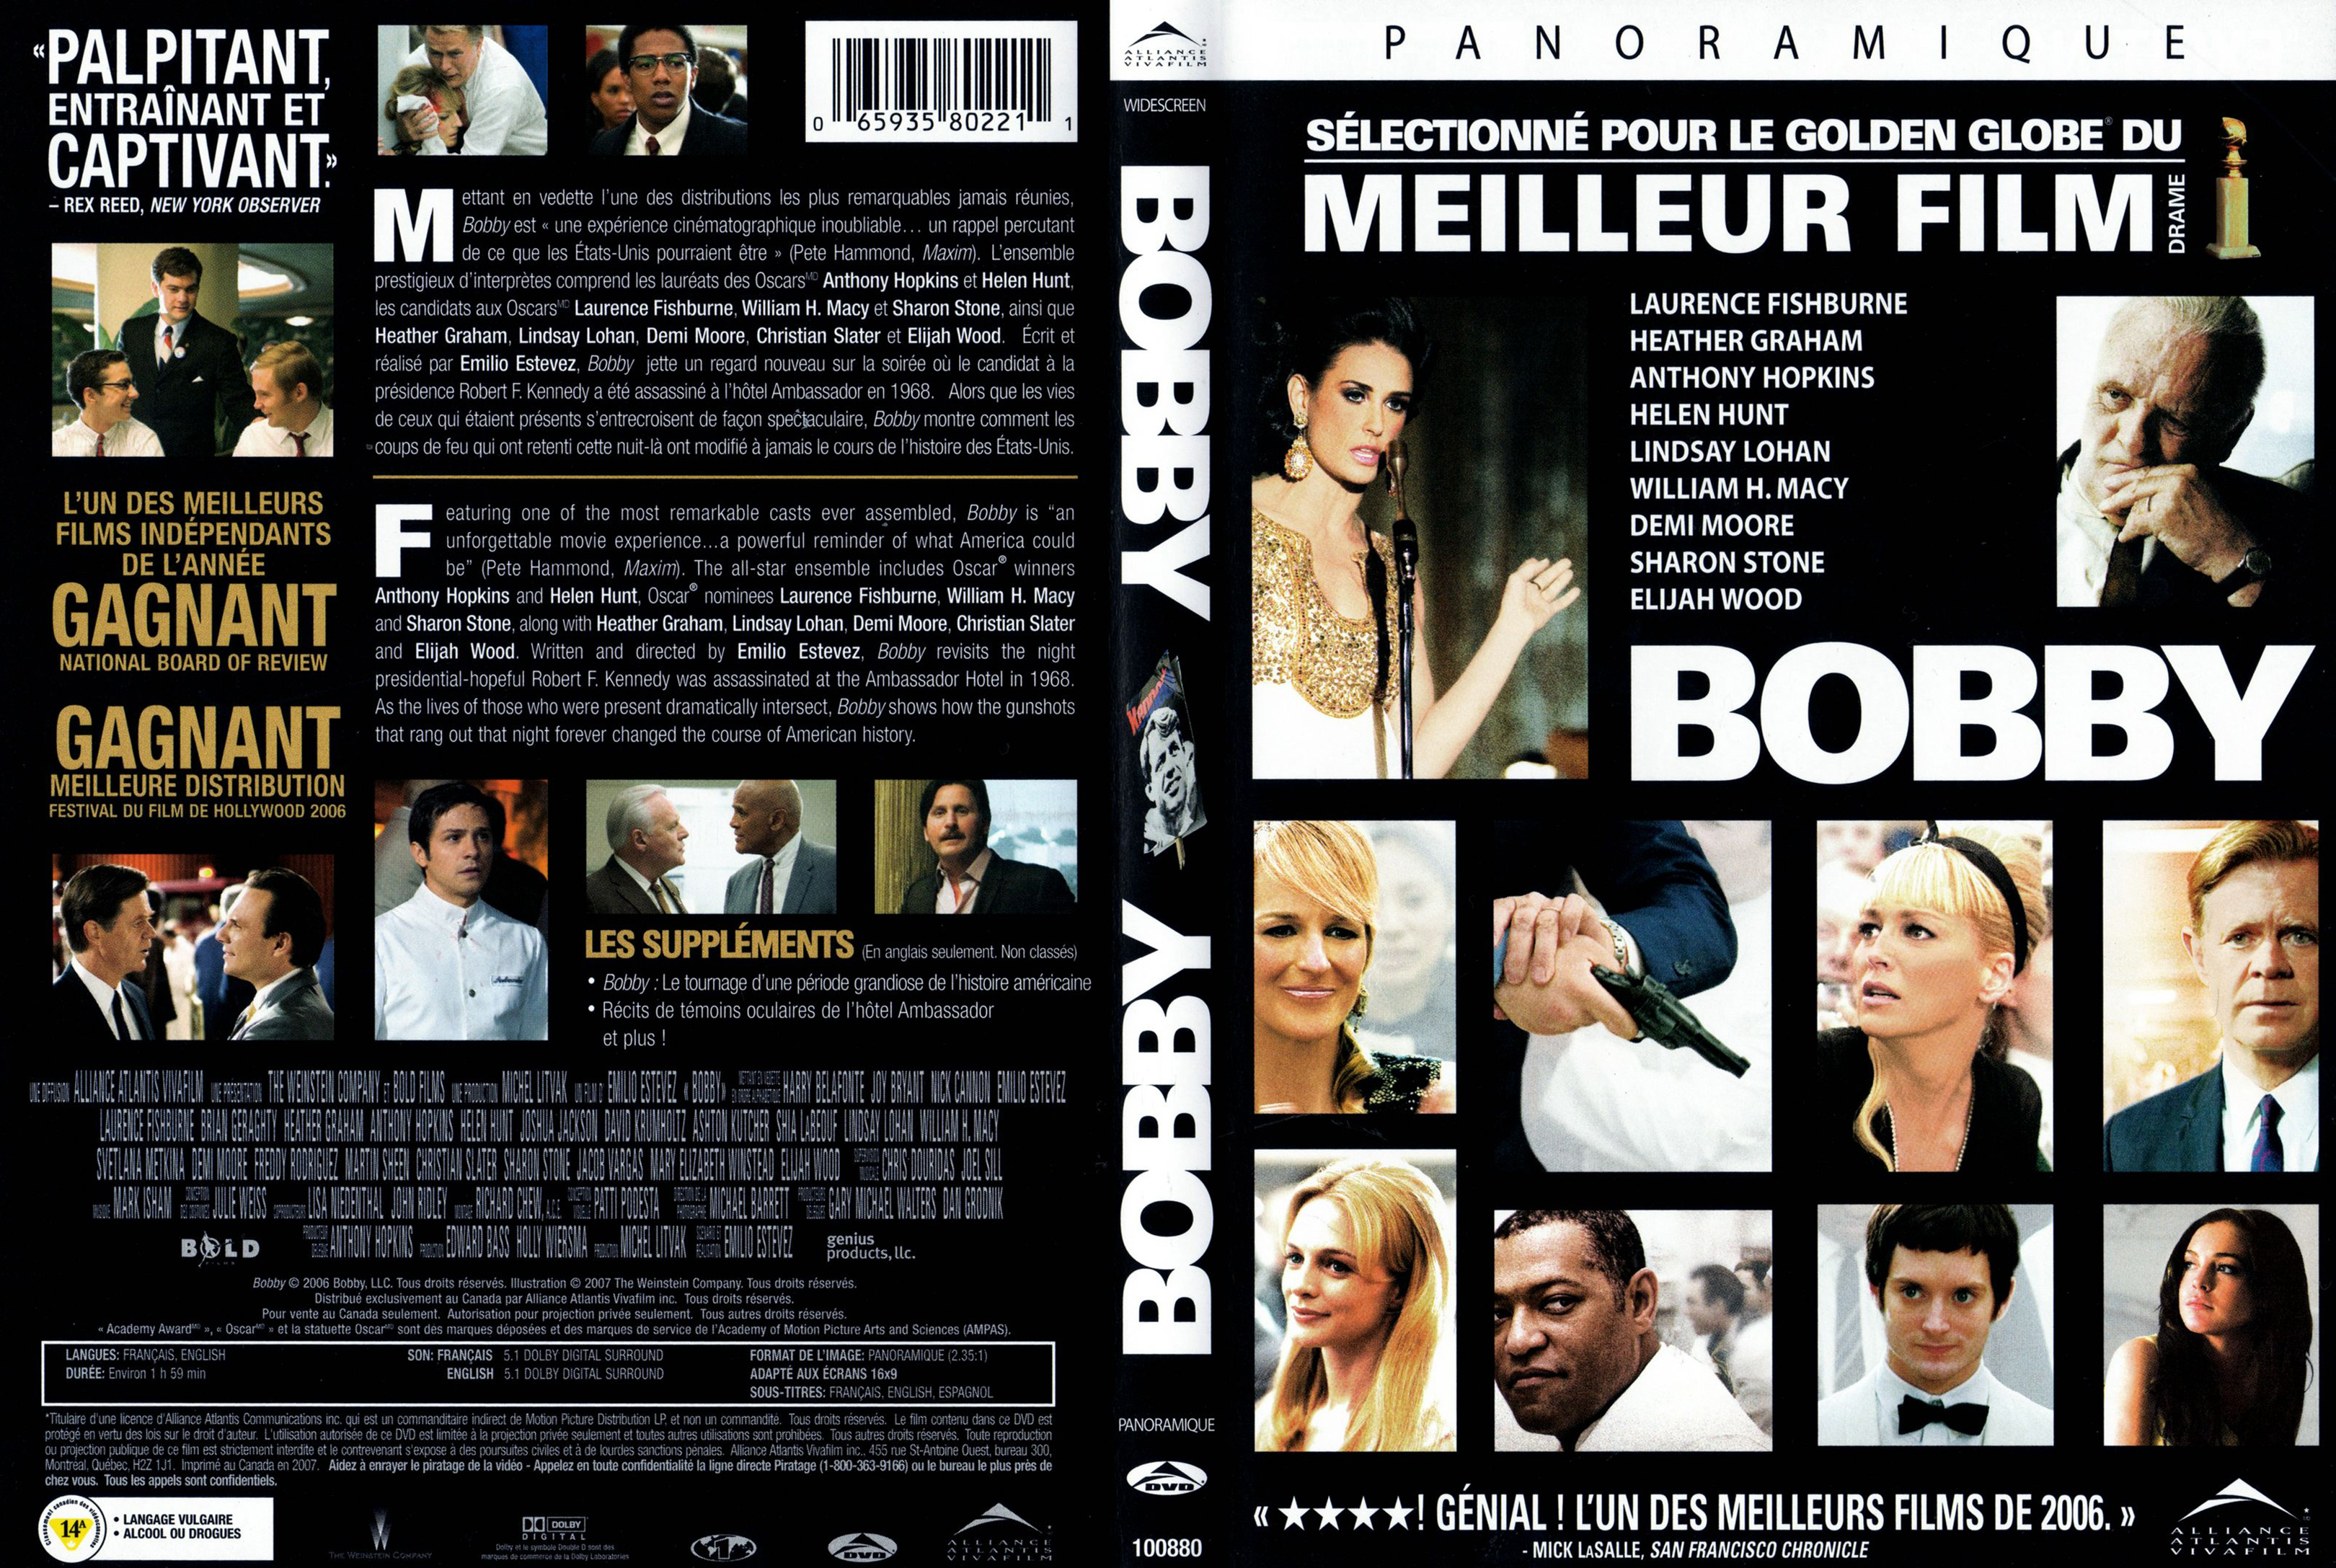 Jaquette DVD Bobby (Canadienne)